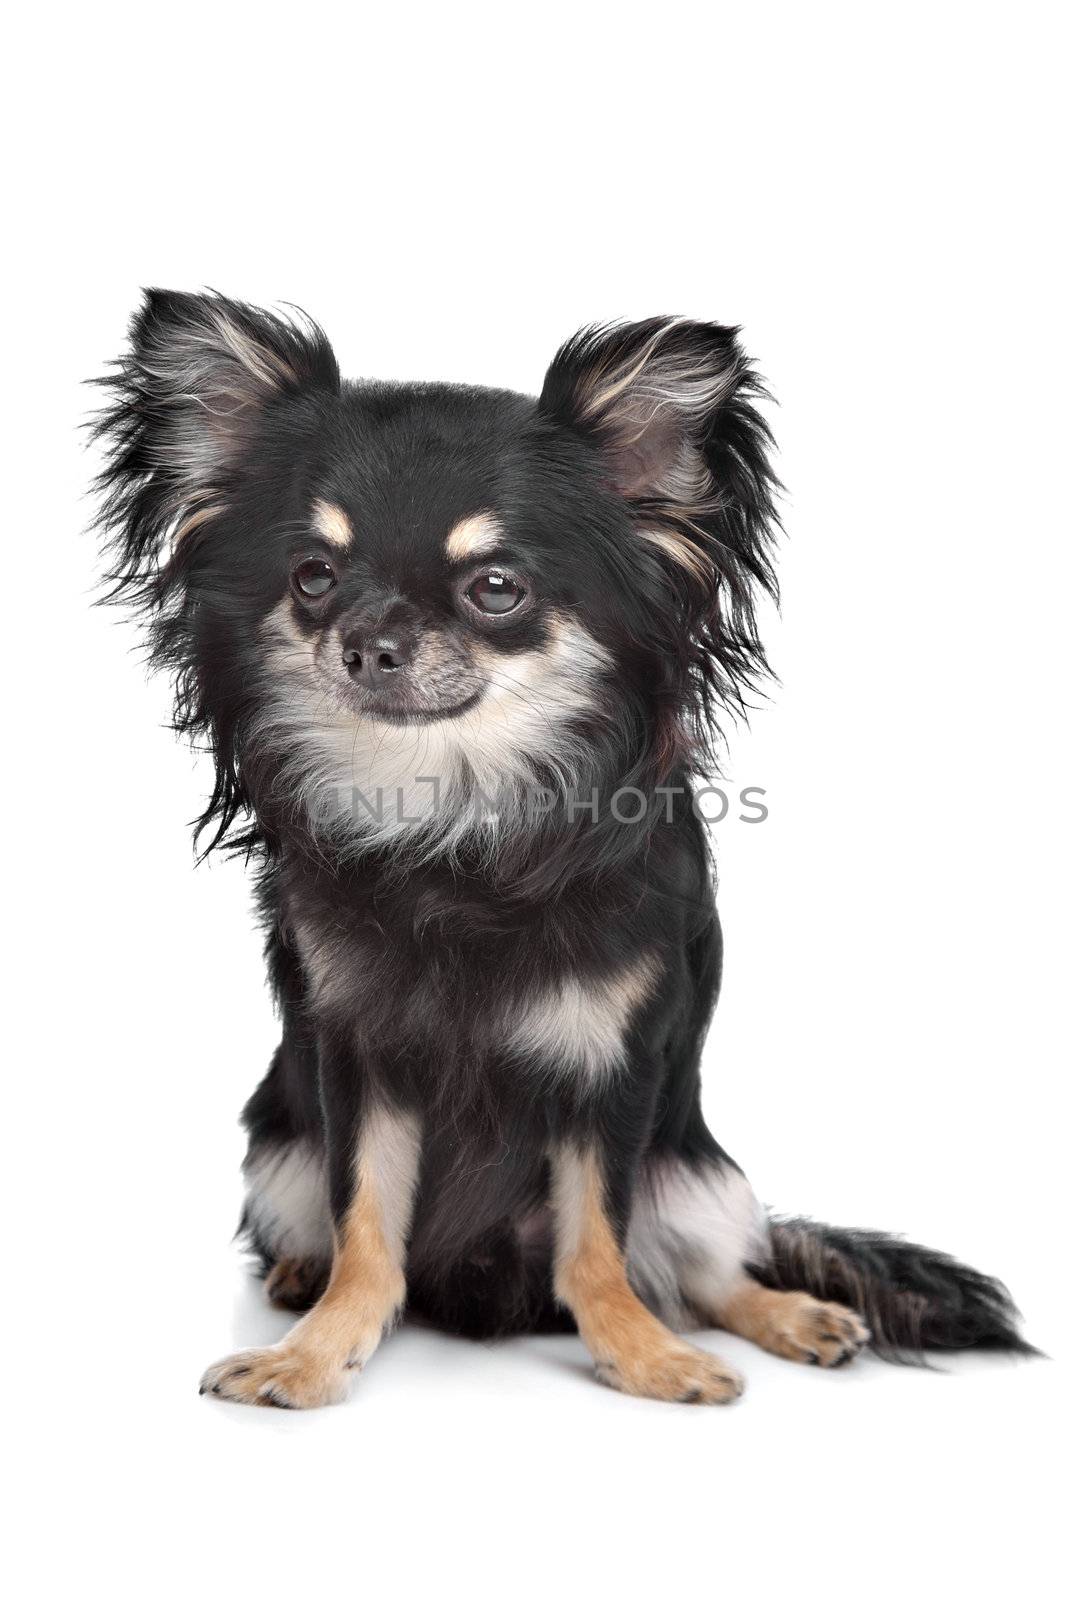 long haired chihuahua by eriklam